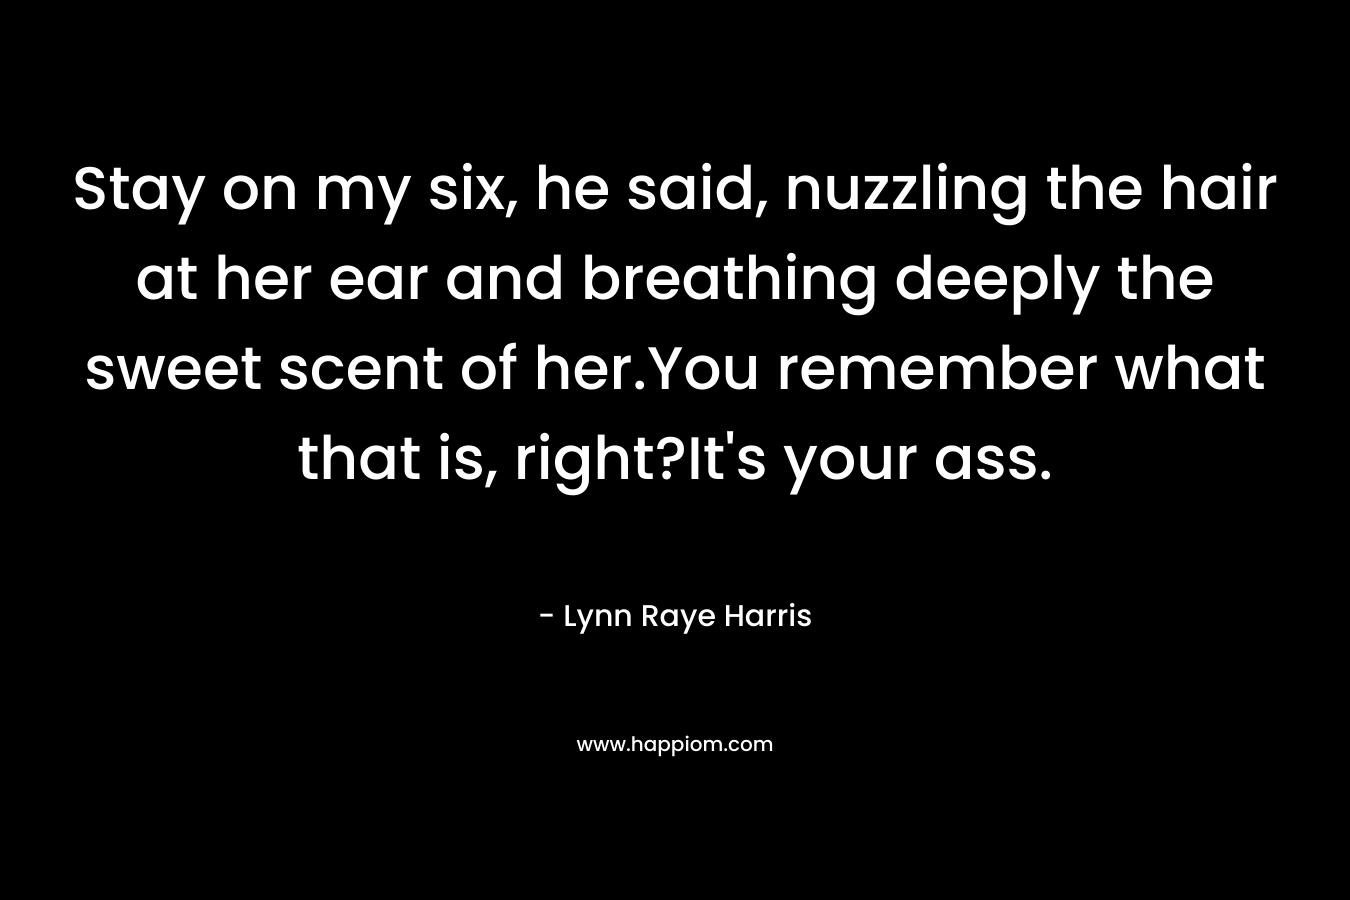 Stay on my six, he said, nuzzling the hair at her ear and breathing deeply the sweet scent of her.You remember what that is, right?It’s your ass. – Lynn Raye Harris